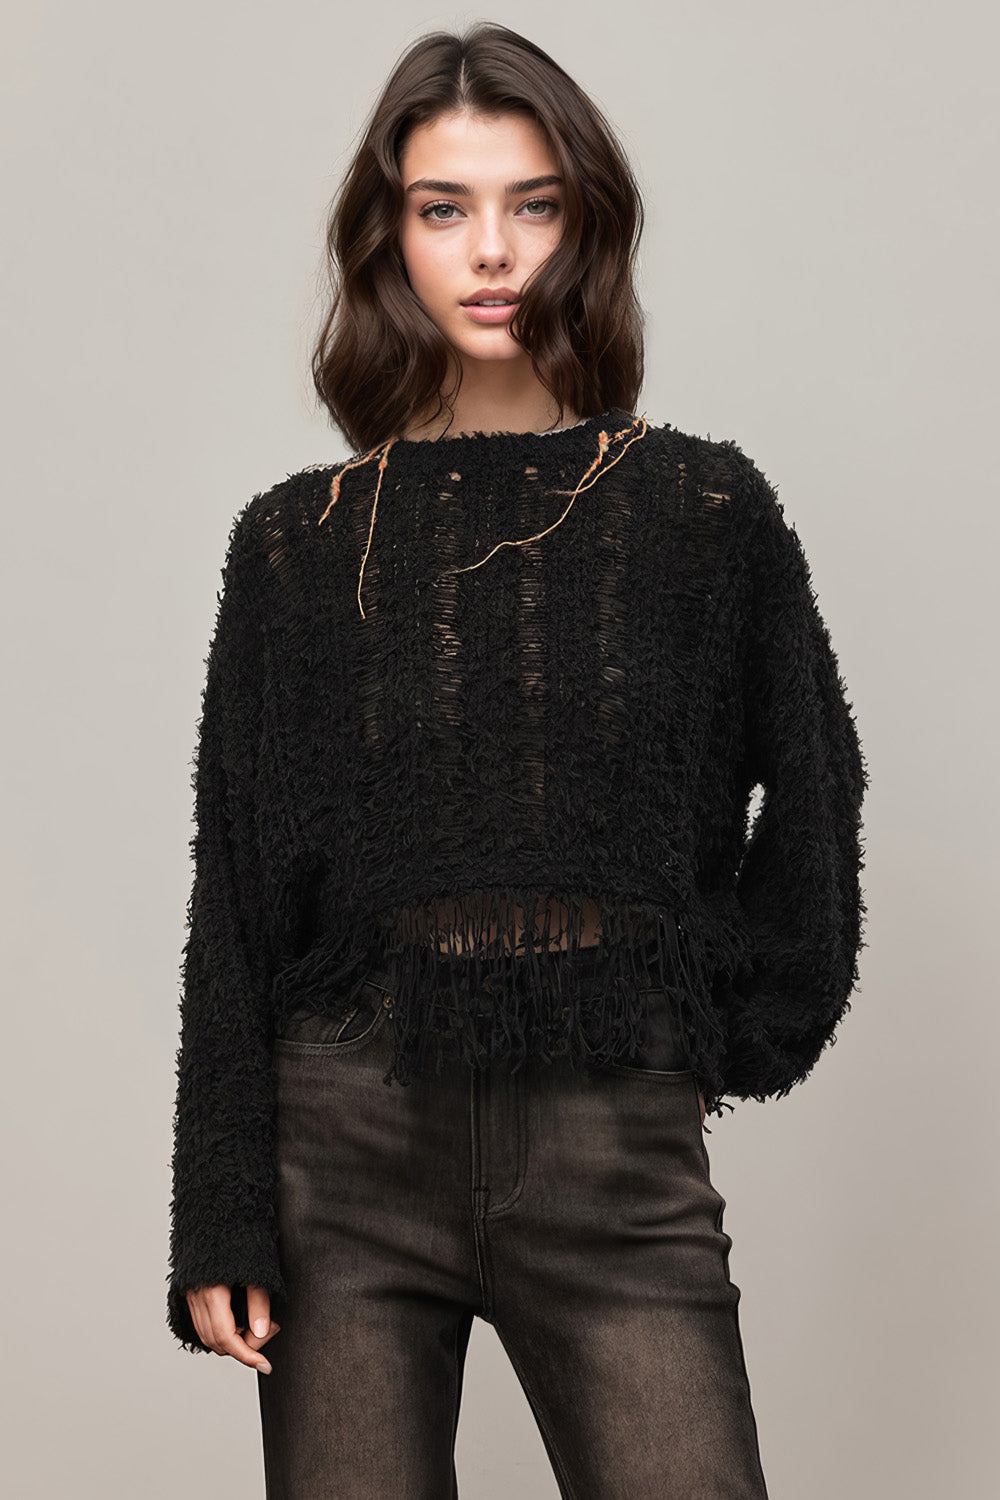 Open-Knit Top with Fringe - Black